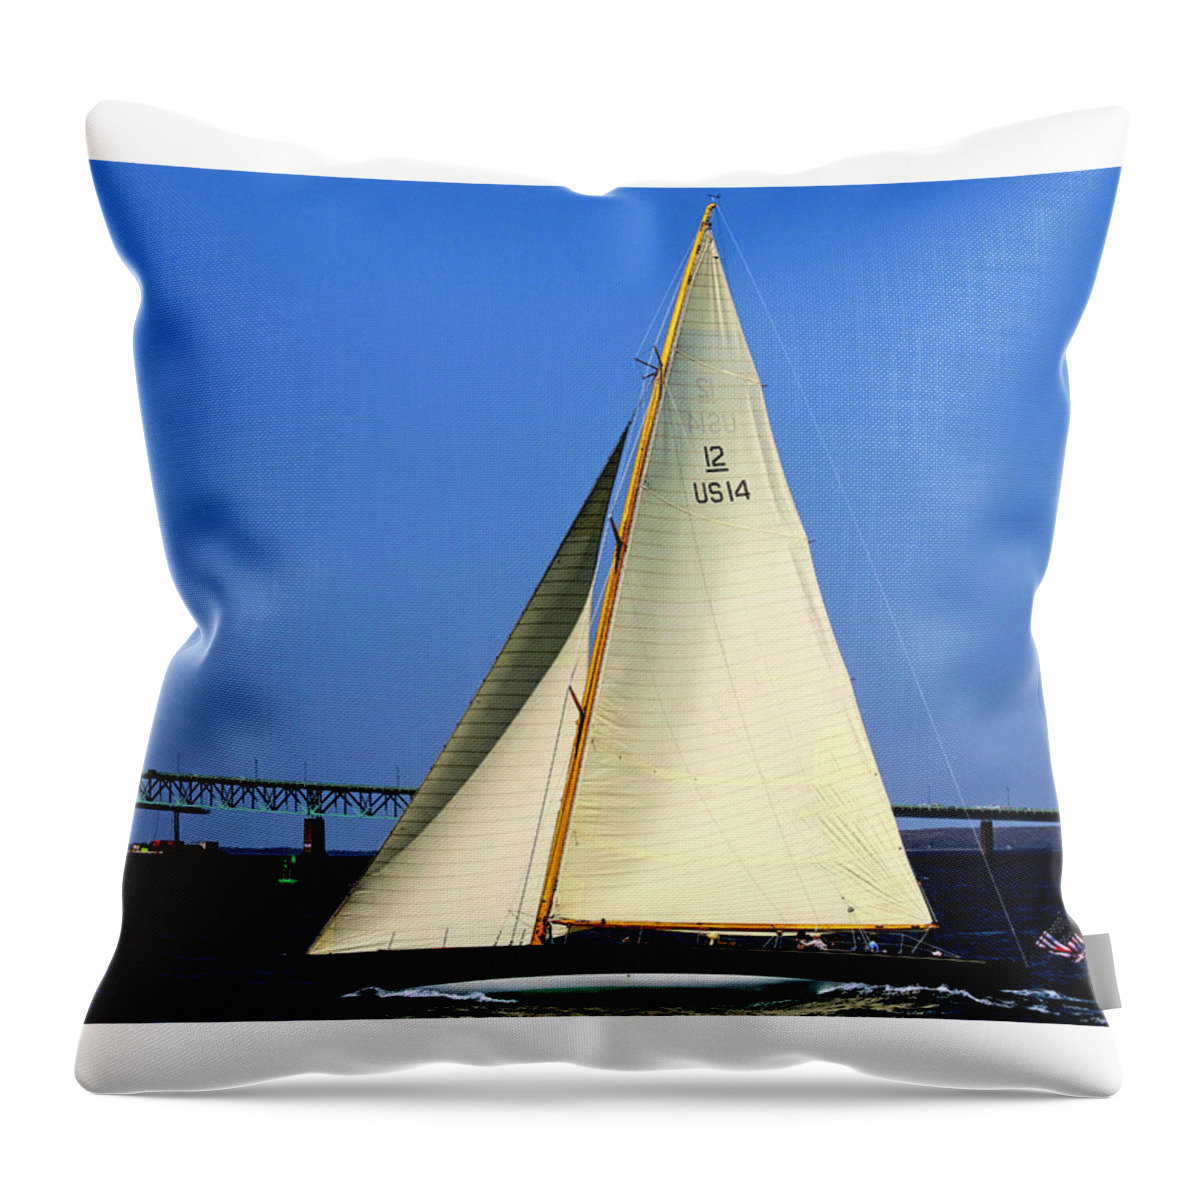 Tom Prendergast Throw Pillow featuring the photograph The 12 Meter Newport by Tom Prendergast